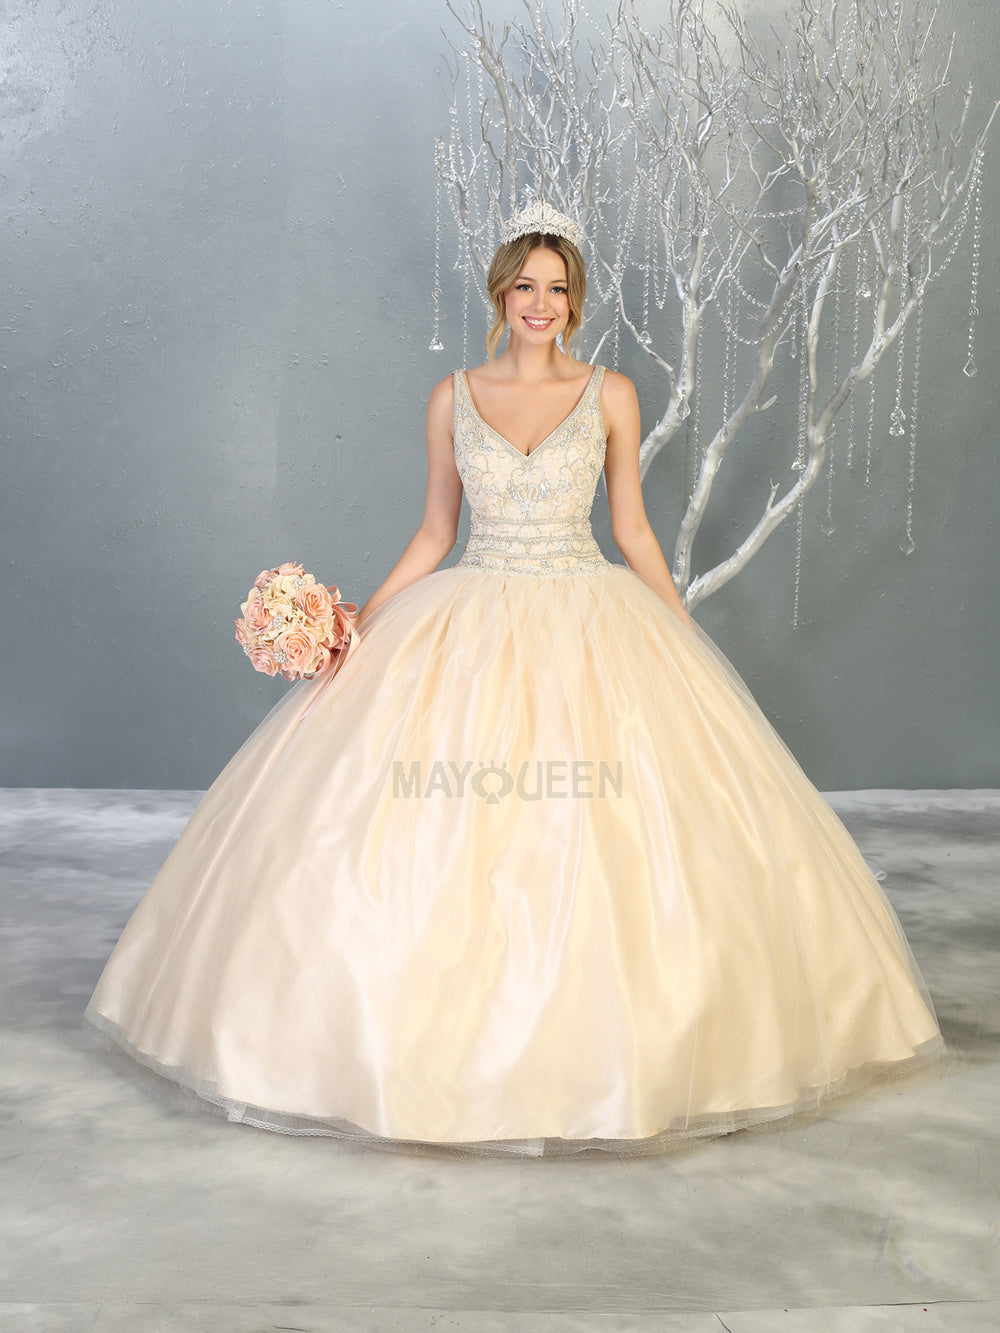 MQ LK143 - A Line Quinceanera Ball Gown with Bead Embellished V-Neck Bodice & Corset Back Quinceanera Gowns Mayqueen 4 Ivory Nude 